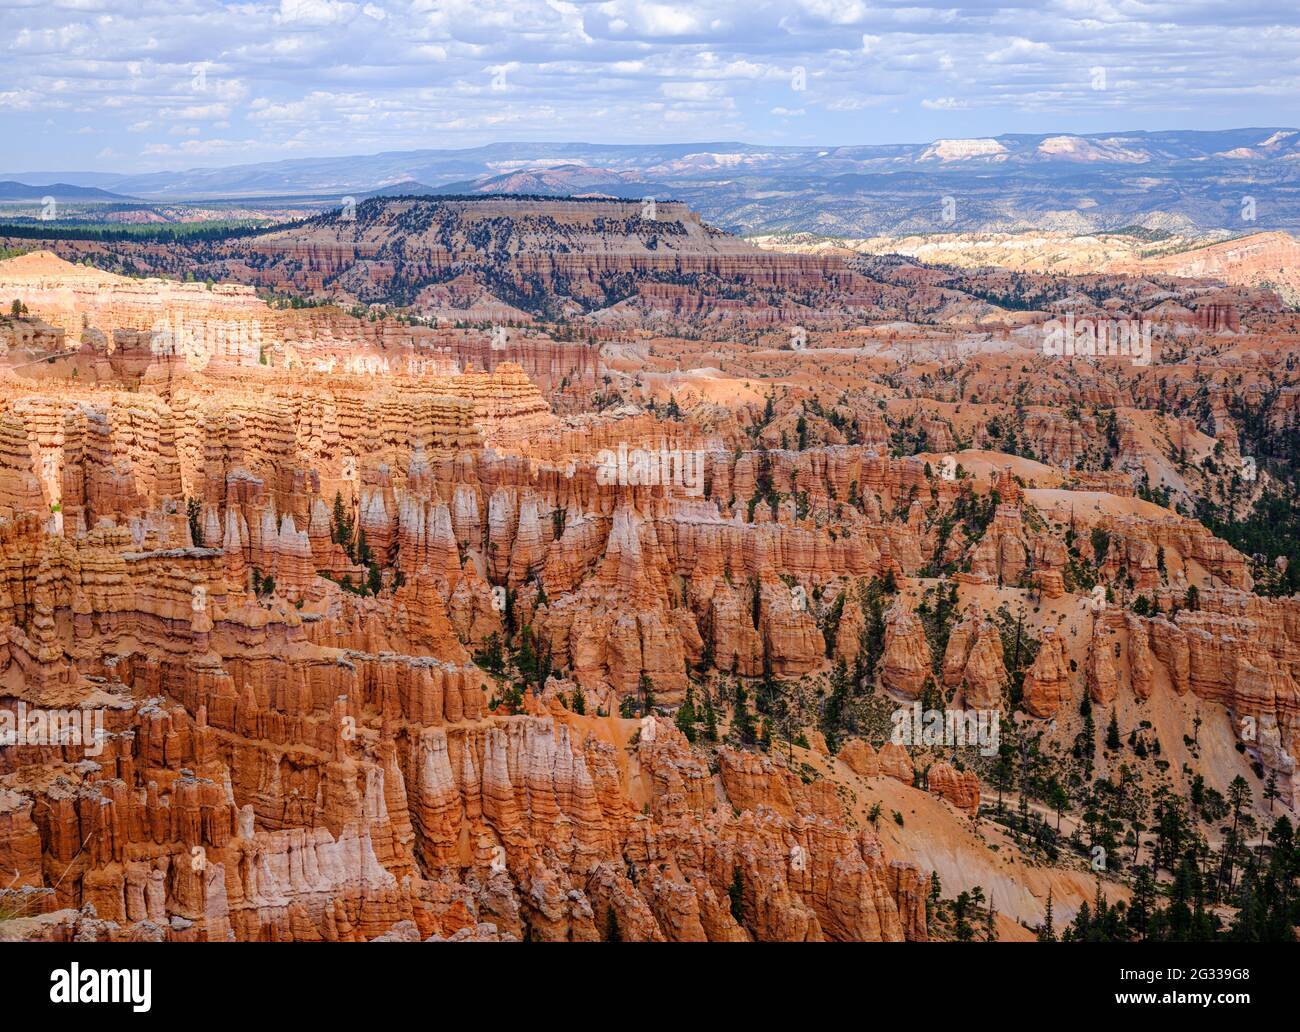 BRYCE, UTAH - CIRCA AUGUST 2020: View of Hoodoos and rock formations in Bryce Canyon National Park, Utah. Stock Photo